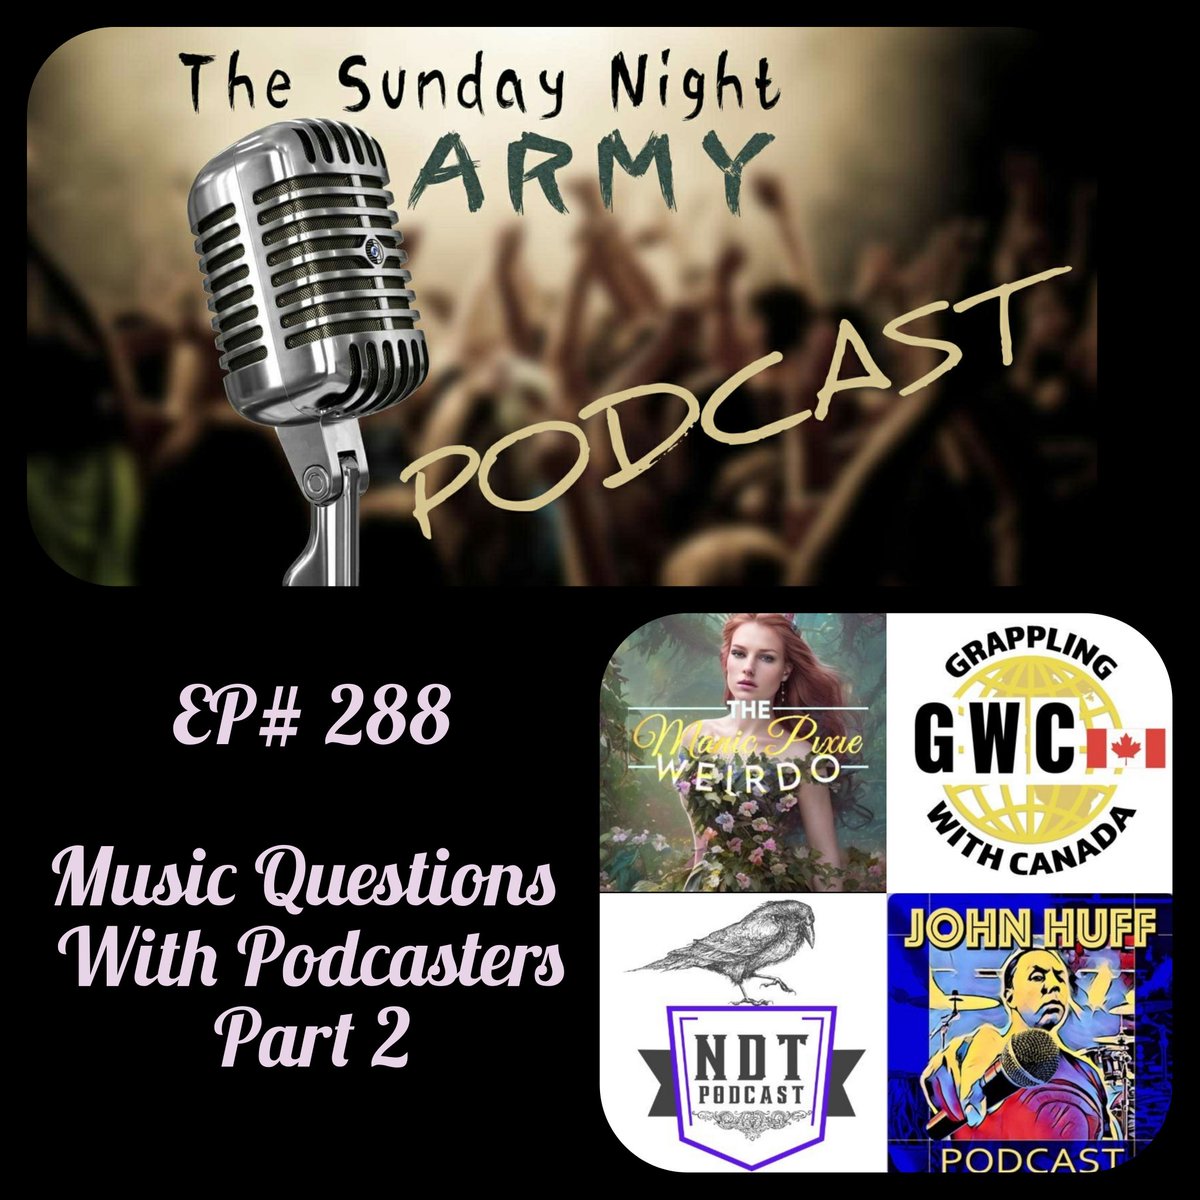 🔥NEW EPISODE🔥 Music With Podcasters Apple👇 podcasts.apple.com/us/podcast/the… Spotify👇 open.spotify.com/show/7k7KVAhMR… Linktree Linktr.ee/thesundaynight… #podcast #podcastandchill #Music #sundayvibes #SundayFunday #SundayMorning #WeekendVibes #Hamburg #Trending #MUSIC_SHOW #podcasting